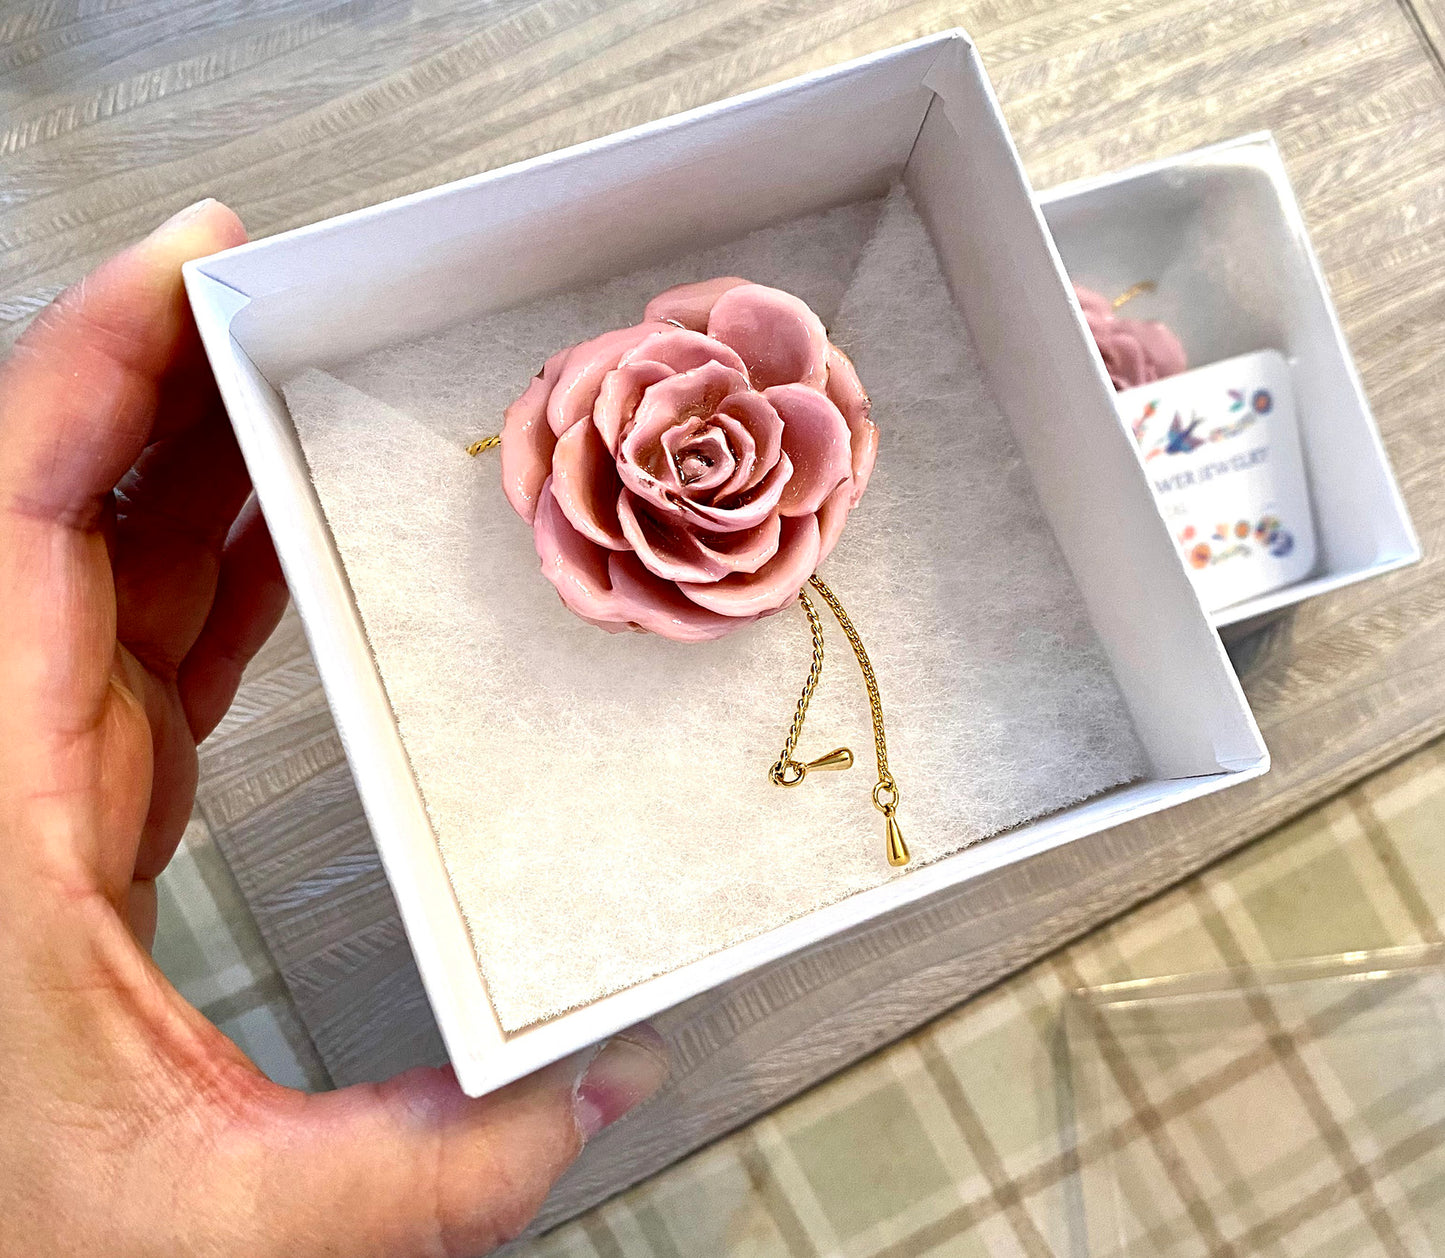 Mini Rose Mini 1.5-2.25 inch Pendant Necklace 18 inch Gold Plated 24K (Baby Pink)